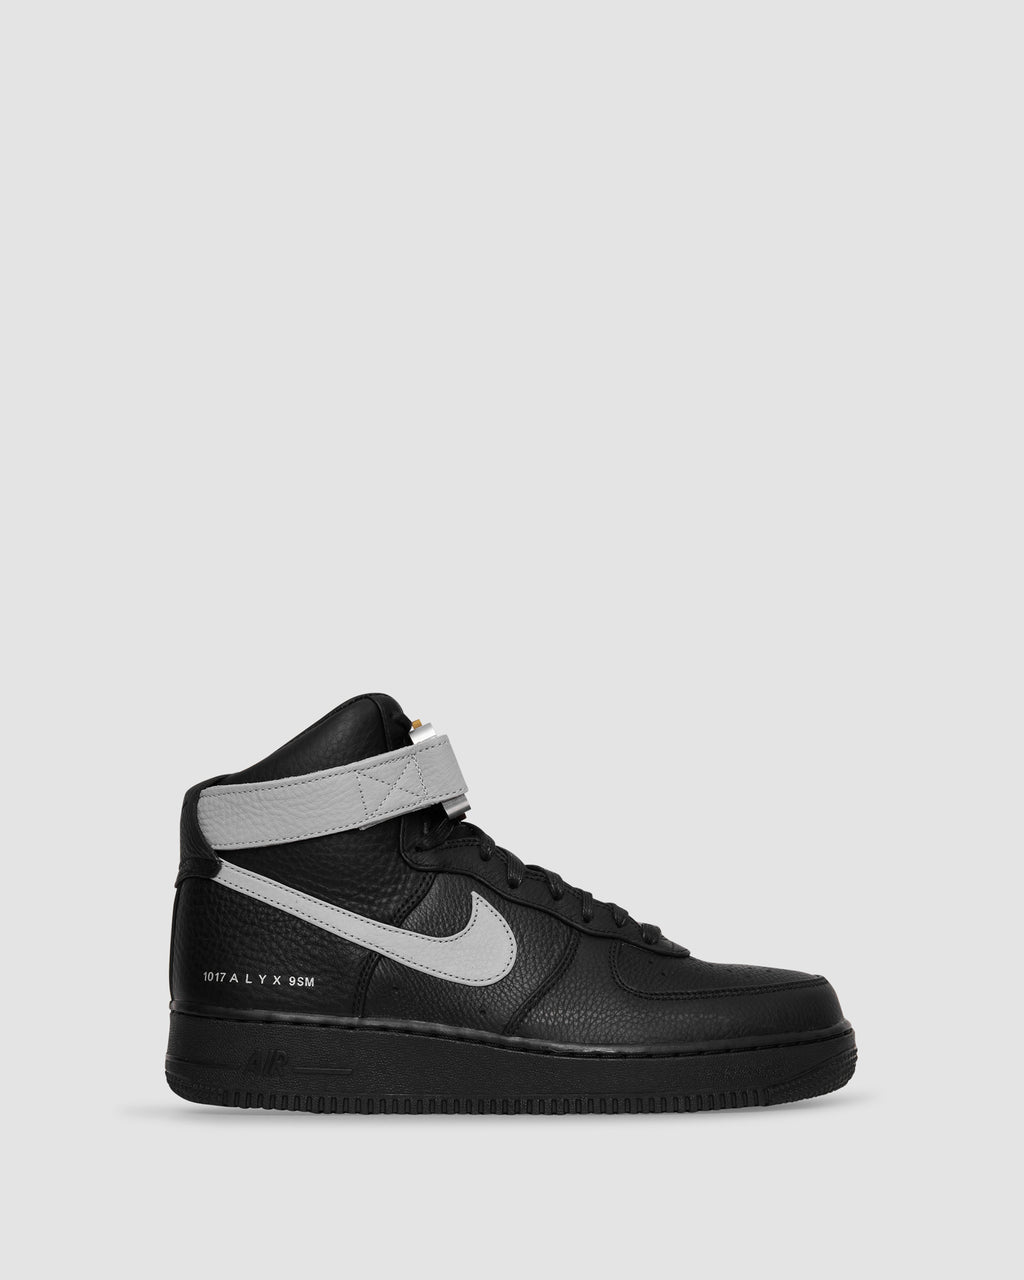 1017 ALYX 9SM | 1017 ALYX 9SM x NIKE AF1 | Crafted from premium tumbled leather and signature 1017 ALYX 9SM detailing, come discover the Matthew Williams's Nike Force 1.